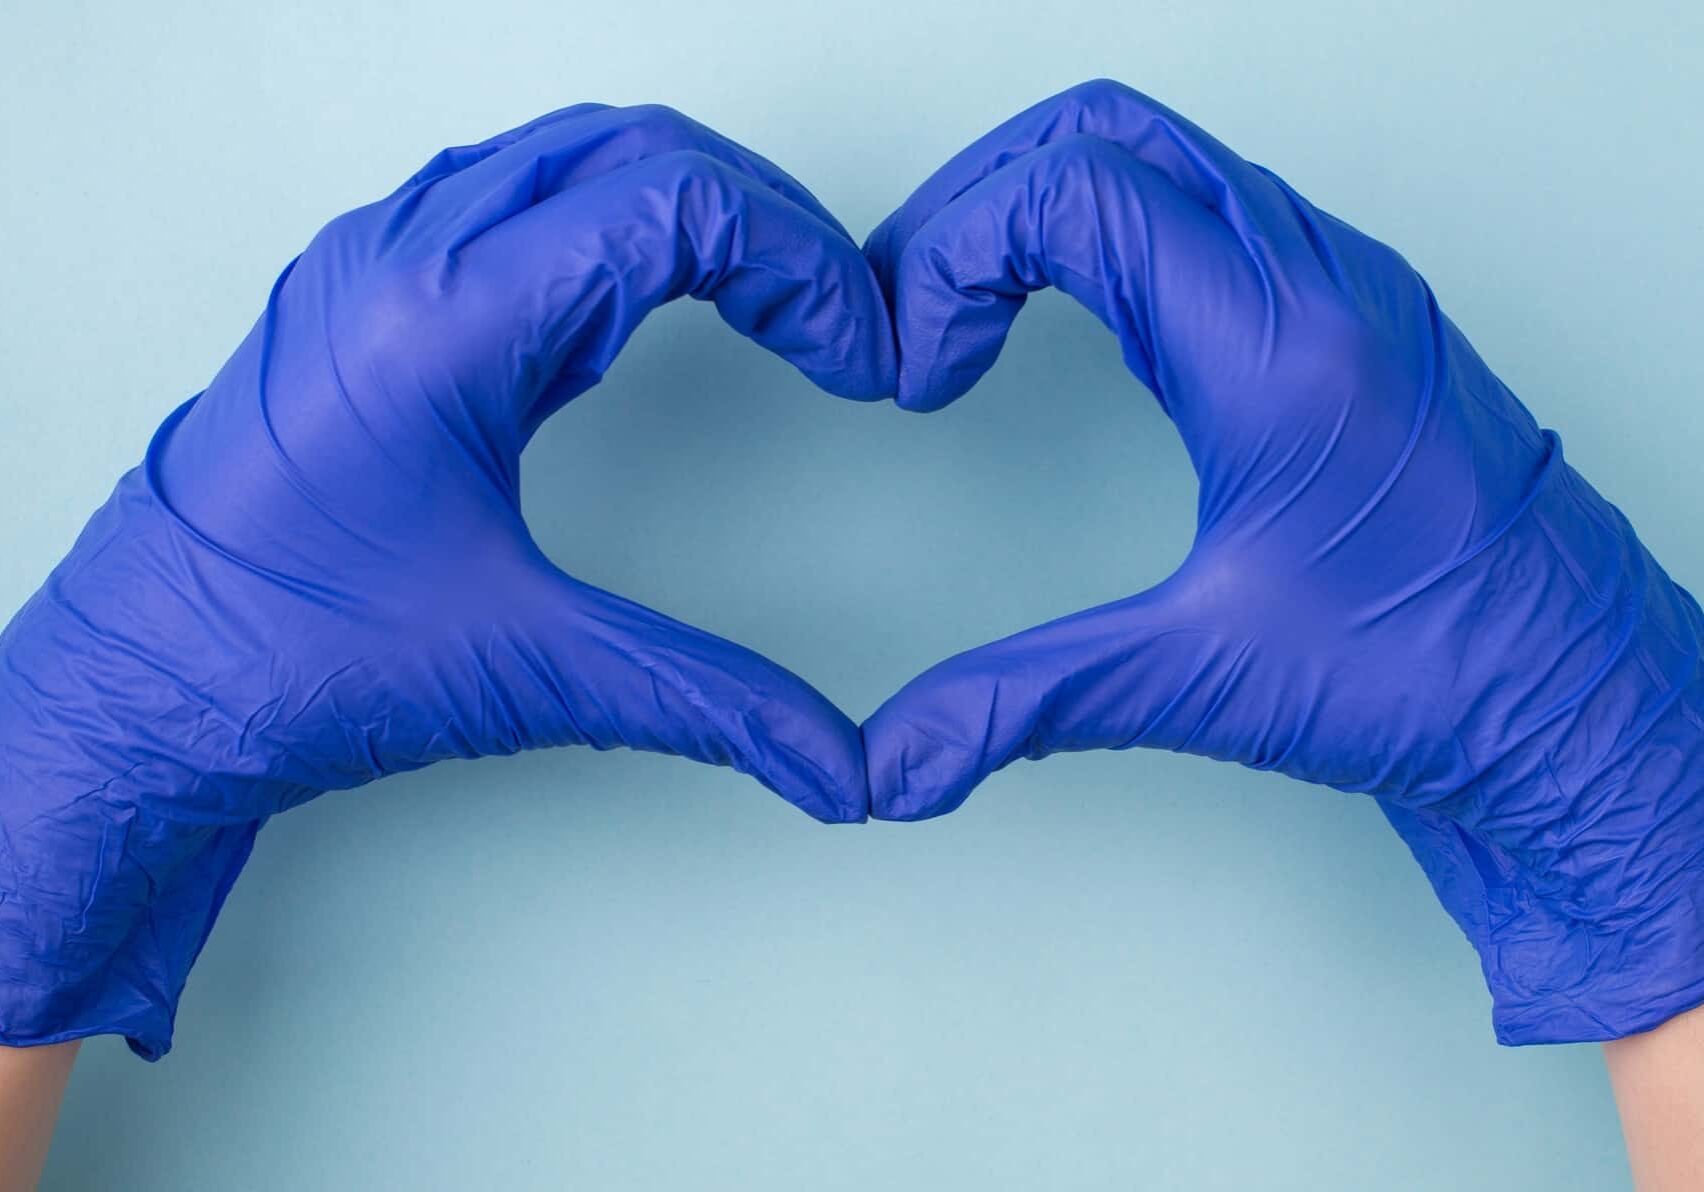 two hands wearing medical gloves make the shape of a heart, indicating the best healthcare shares on the ASX market